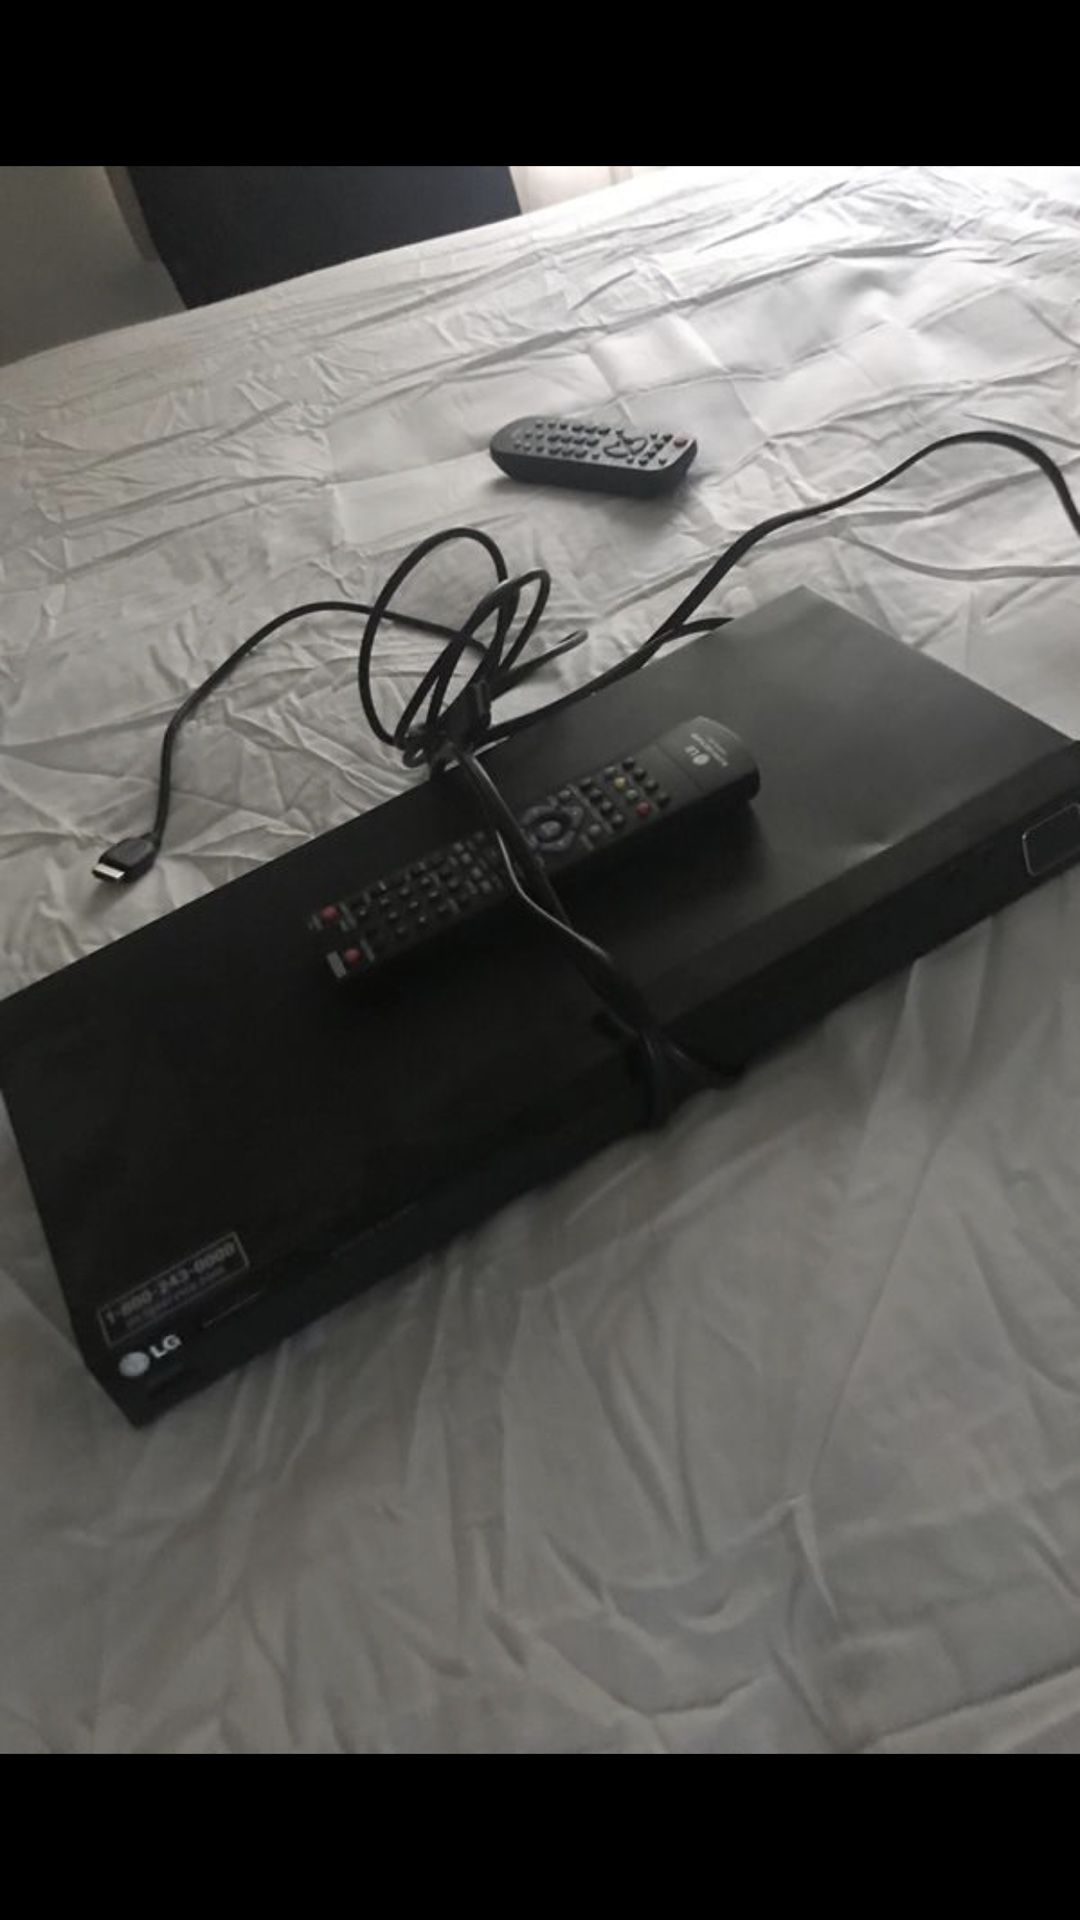 Lg DVD player with HDMI CORD